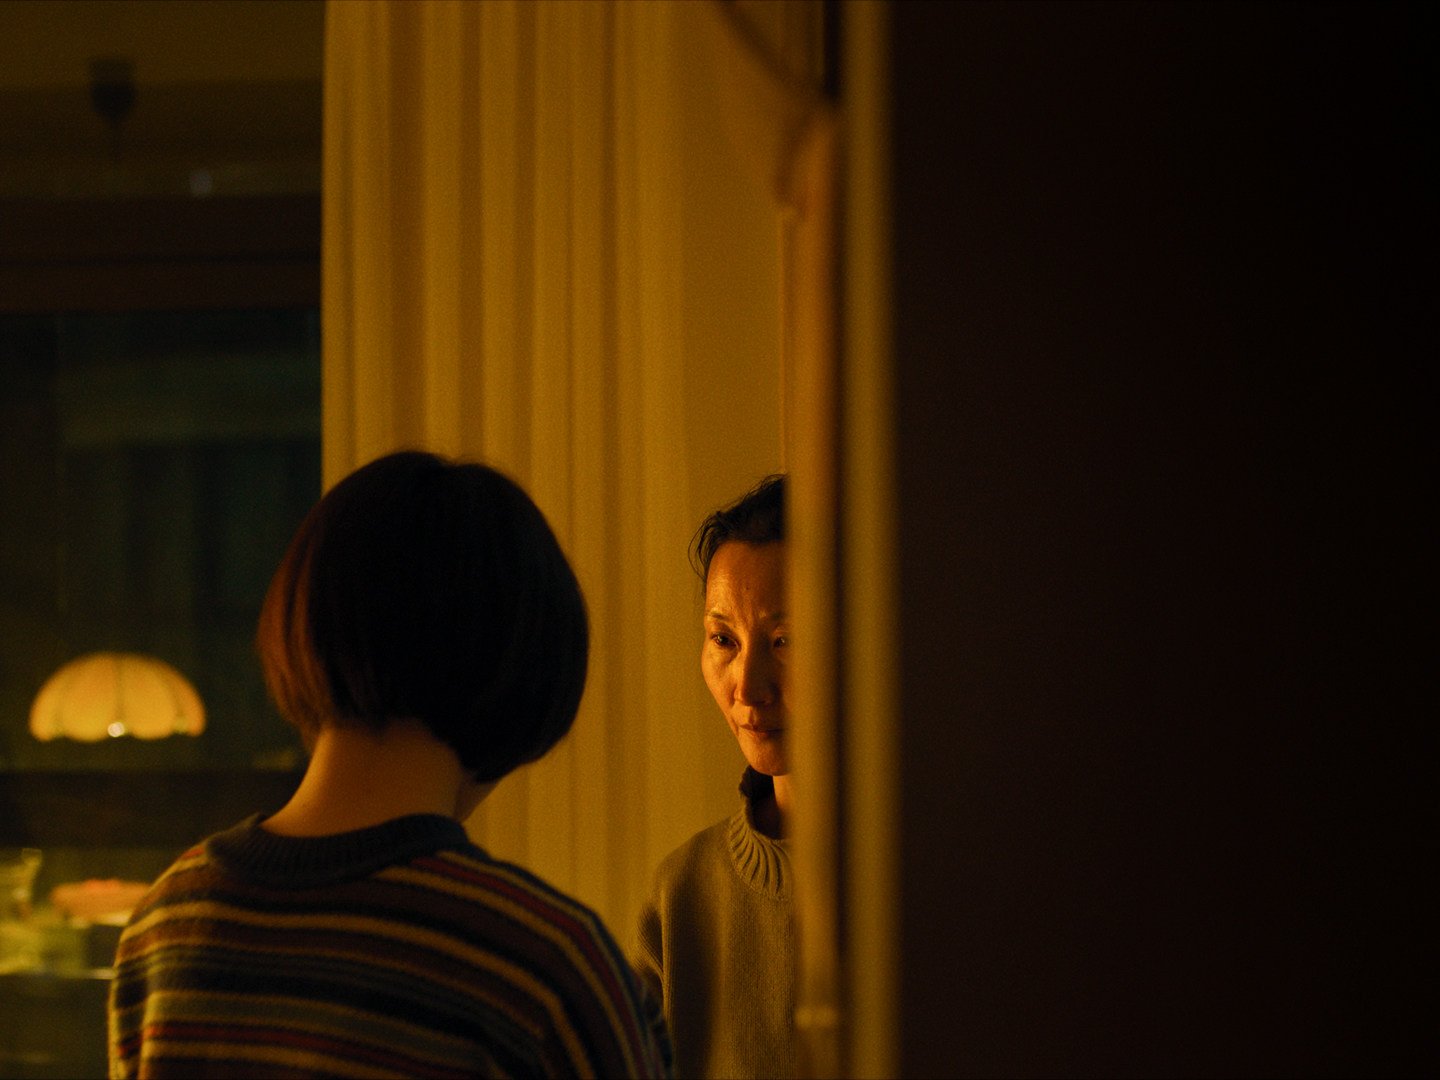 Yu Aier in a still from Some Rain Must Fall (category TBC), directed by Qiu Yang and co-starring Di Shike and Wei Yibo. Photo: Wild Grass Films